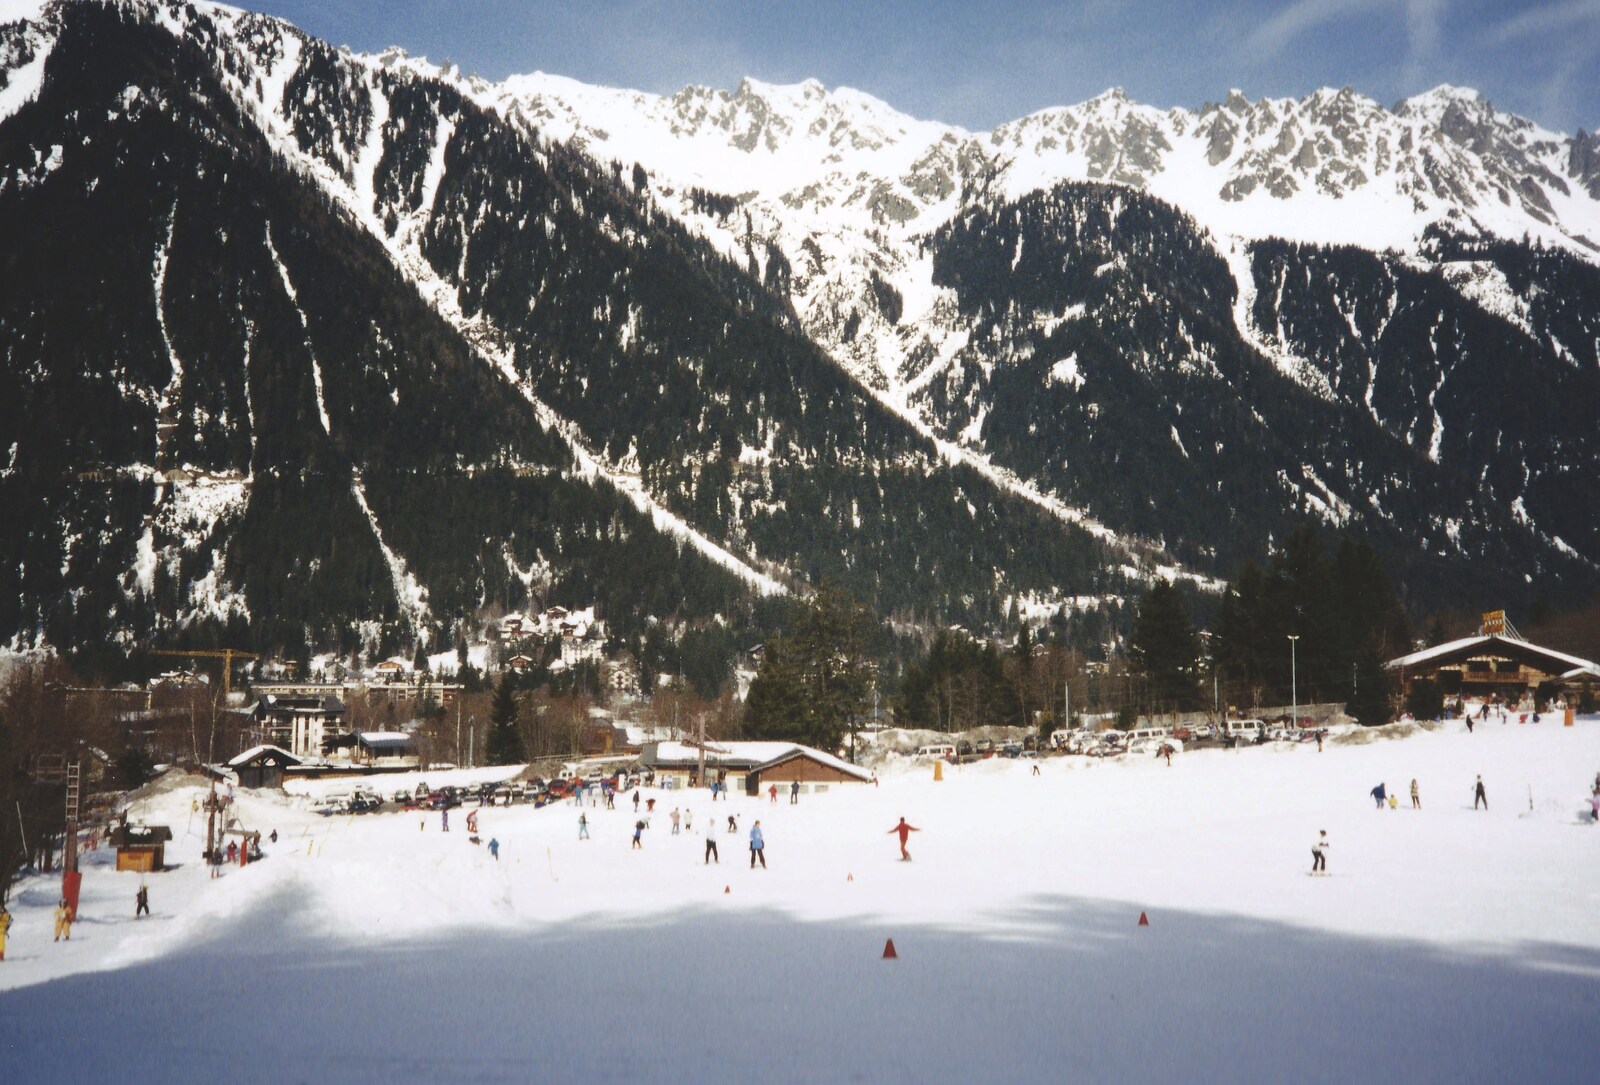 Skiing With Sean, Chamonix, Haute-Savoie, France - 15th March 1999: On the baby slopes of Les Planards